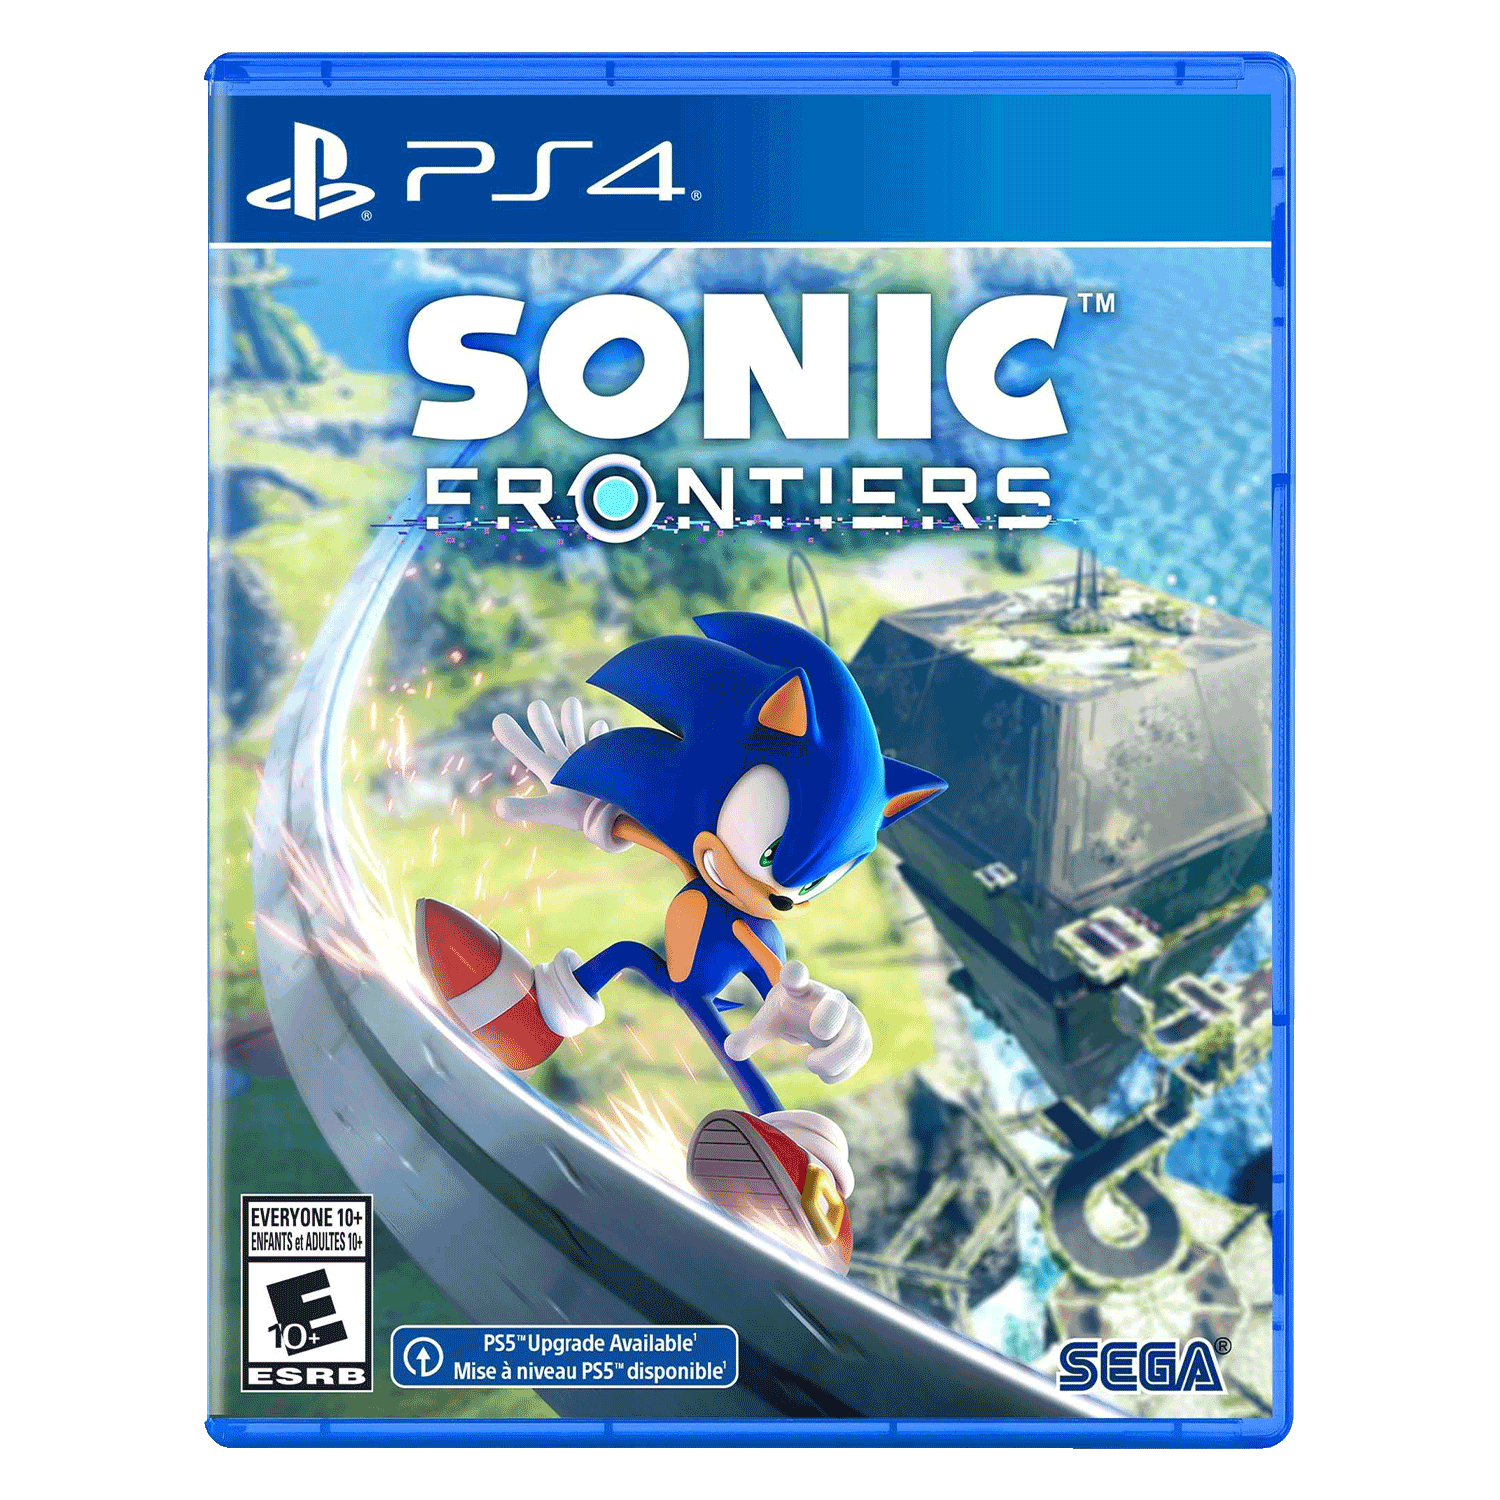 Jogo Sonic Frontiers - PS5 - Brasil Games - Console PS5 - Jogos